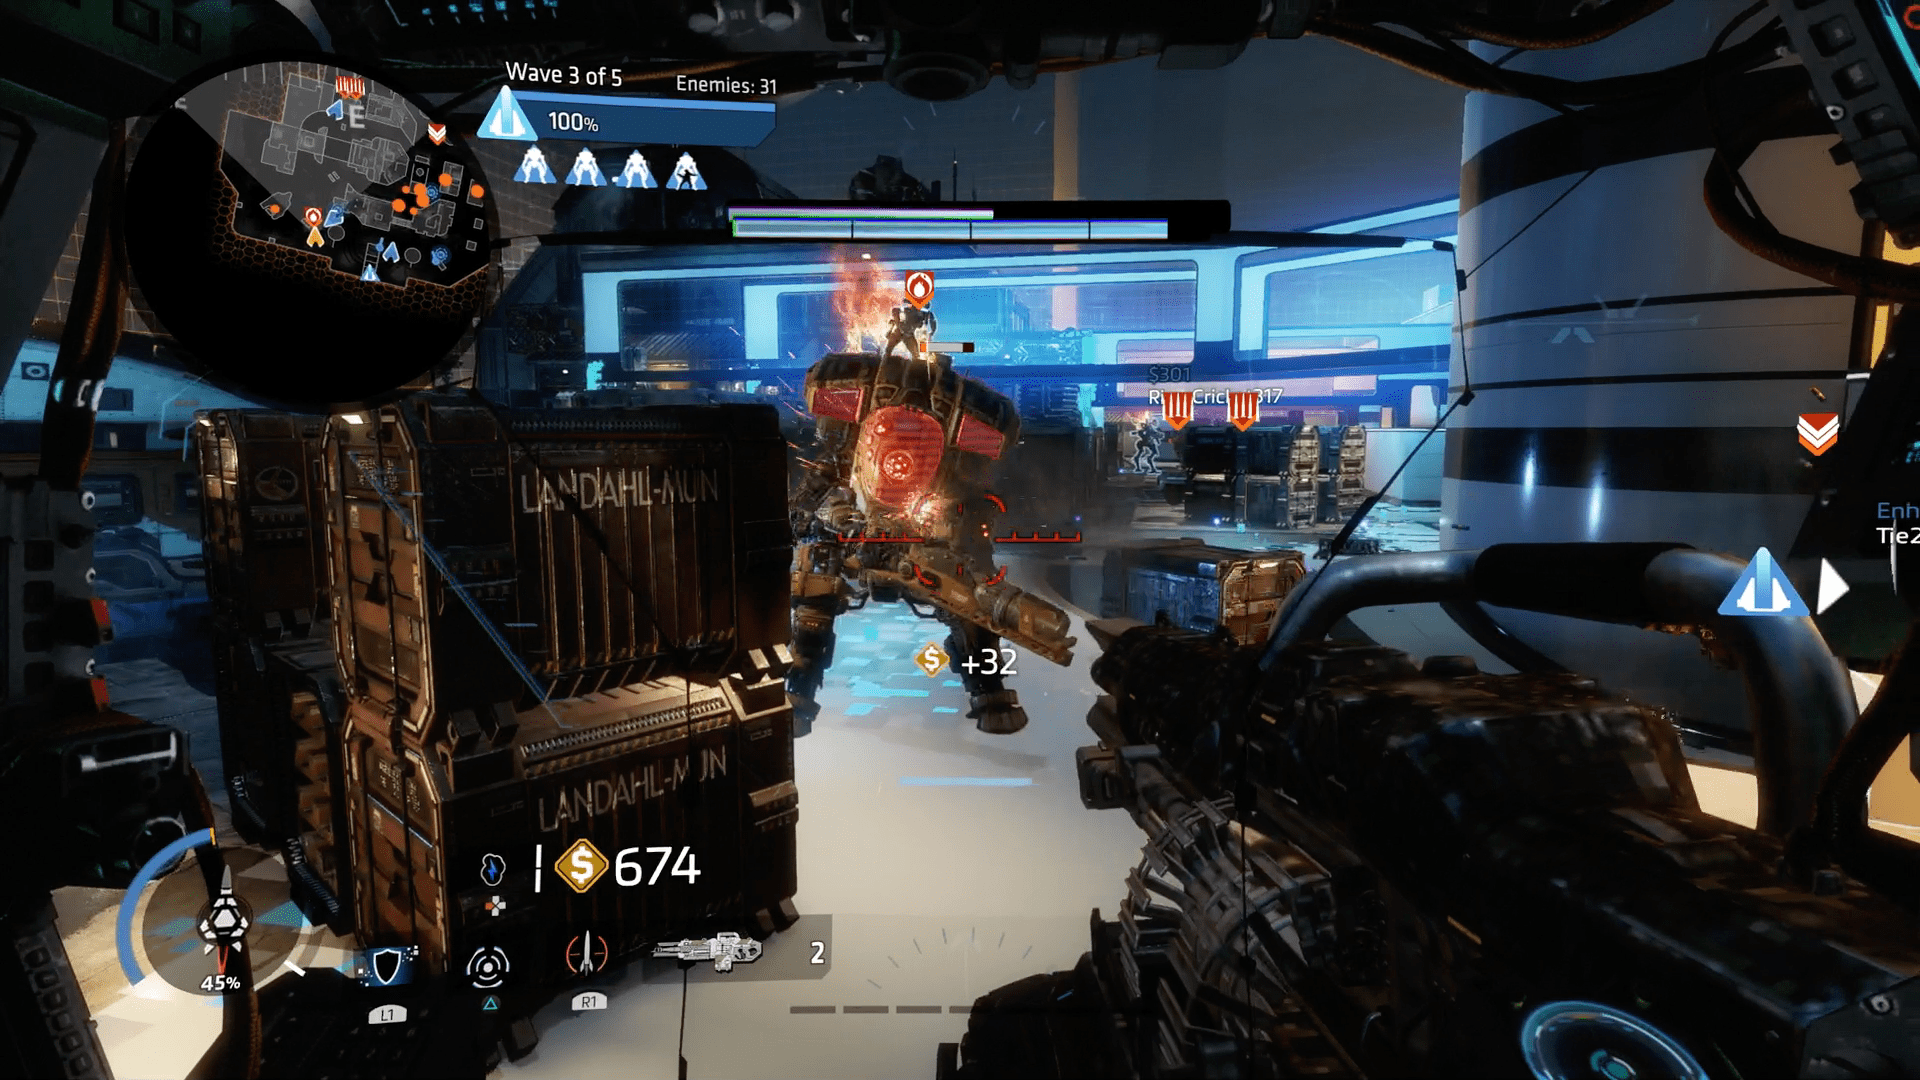 Titanfall 2 has some of the best mods out there #titanfall2